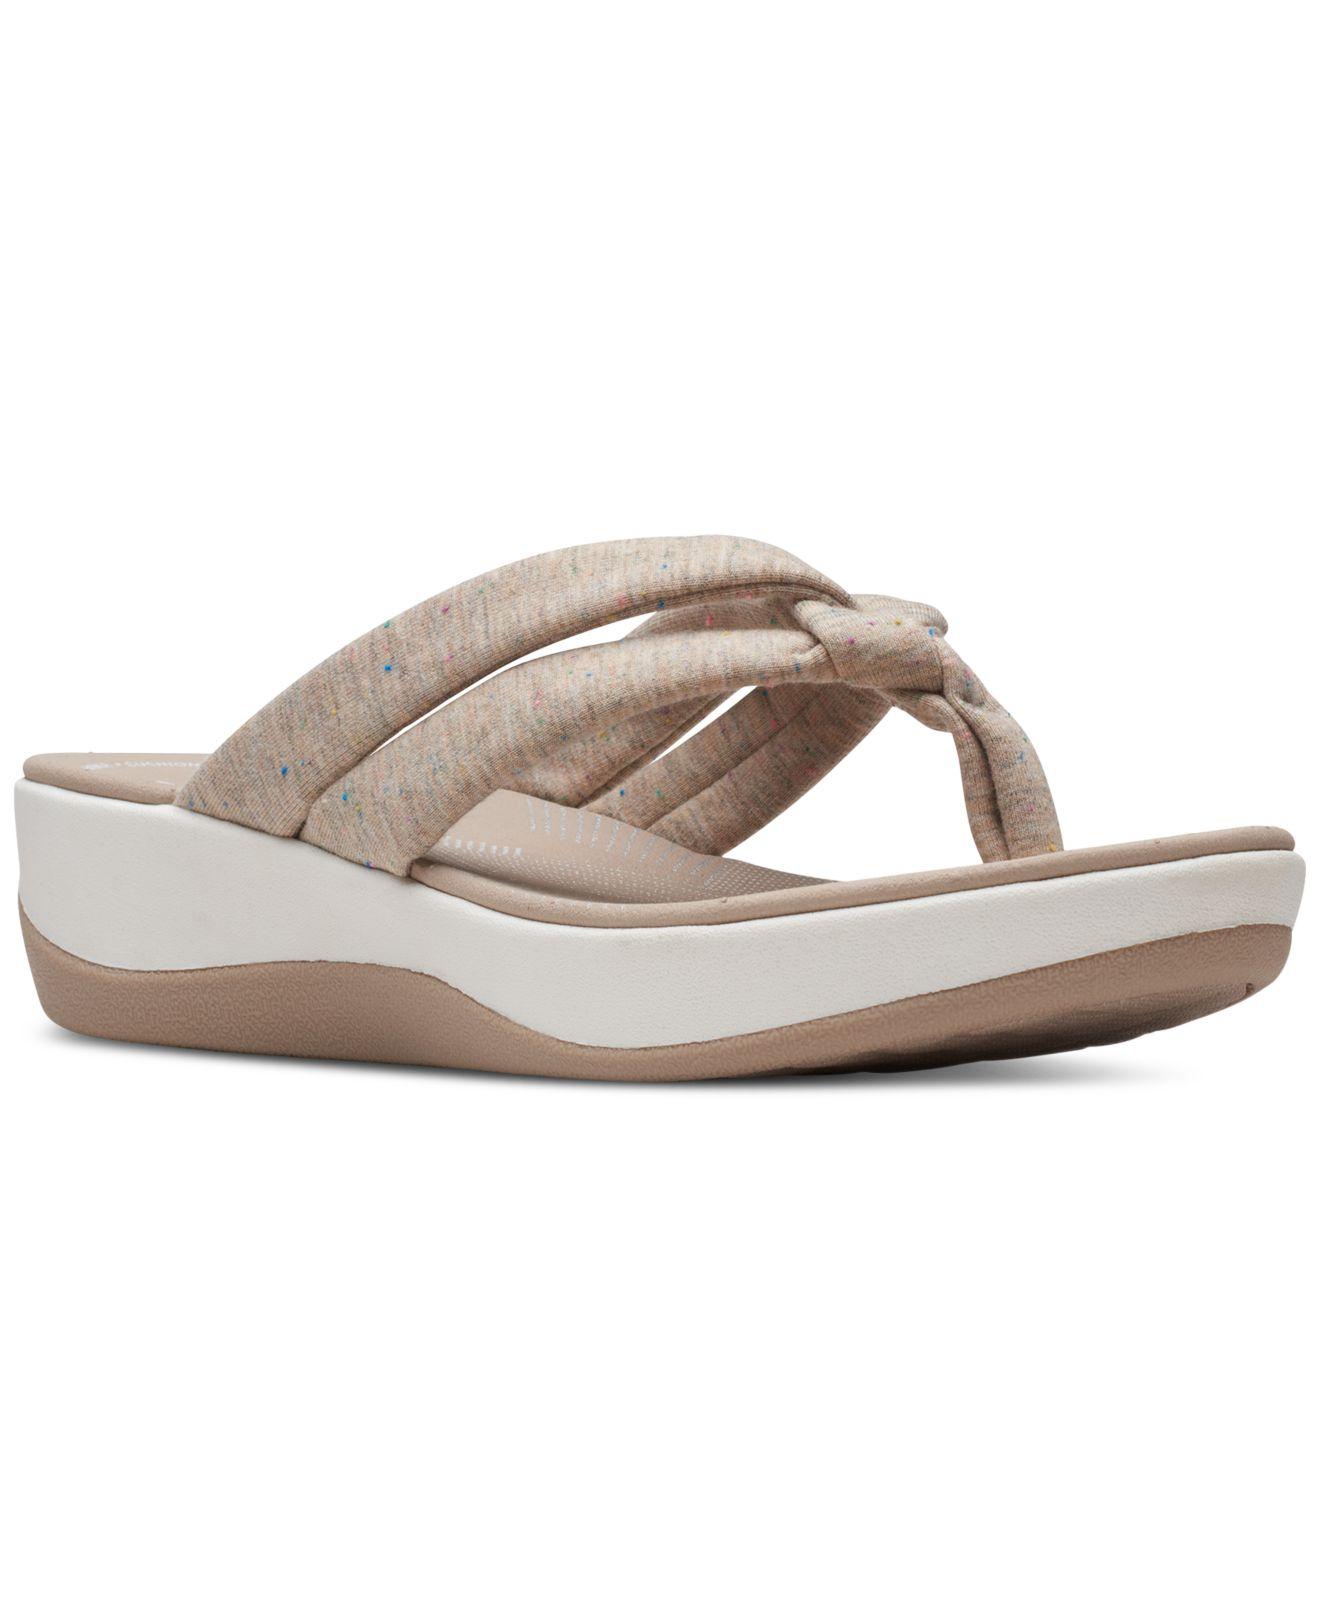 Clarks Cloudsteppers? Arla Kaylie Slip-on Thong Sandals in White | Lyst